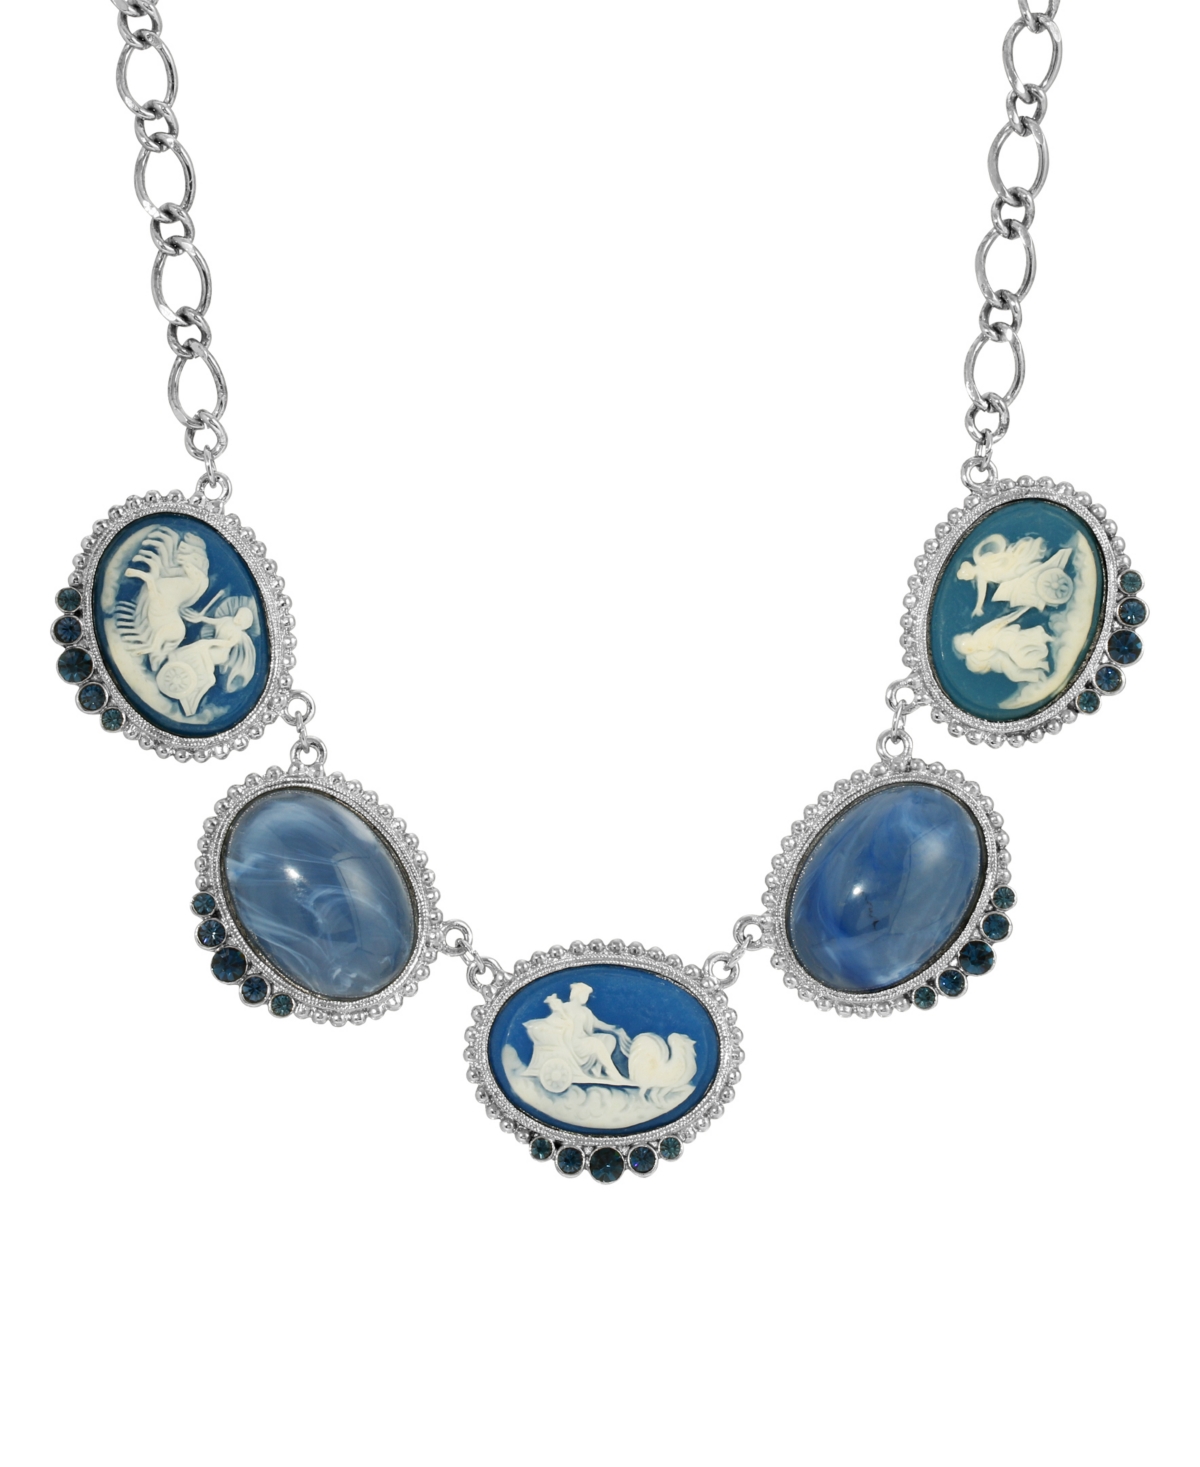 2028 Silver-tone Chariot Cameo And Montana Stones Adj Necklace, 16" + 3" In Blue